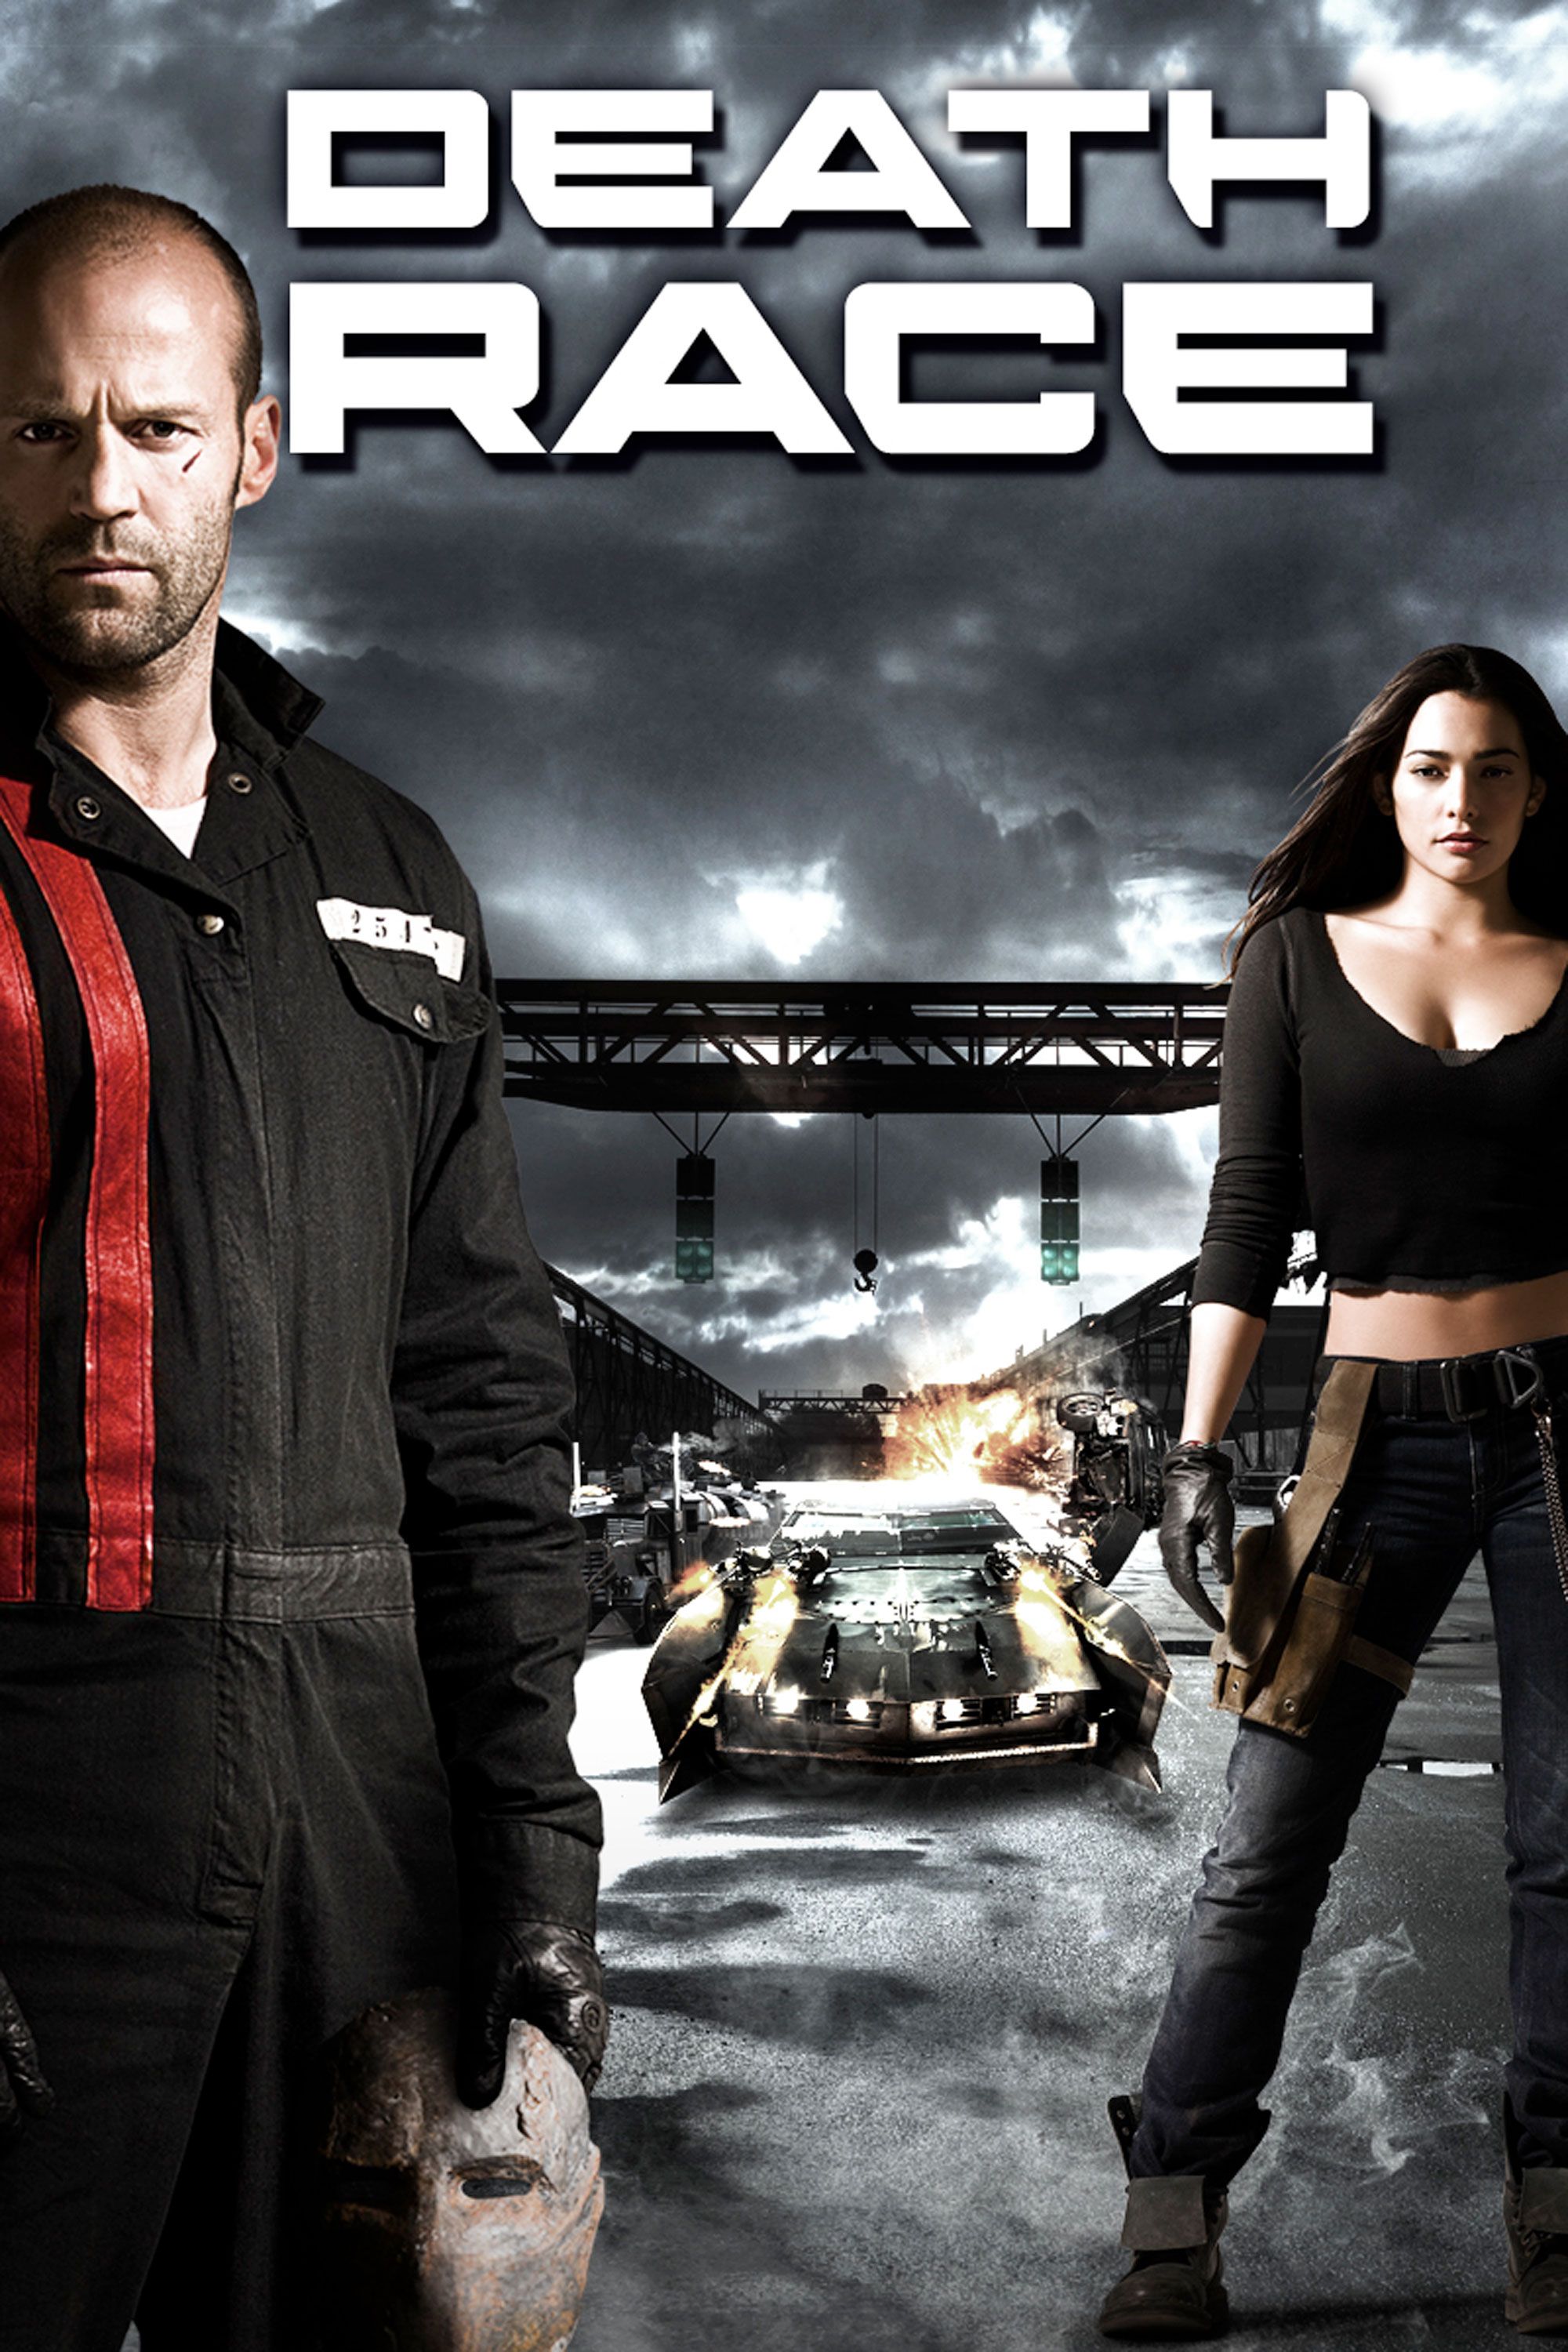 christine rizzi recommends death race free movie pic